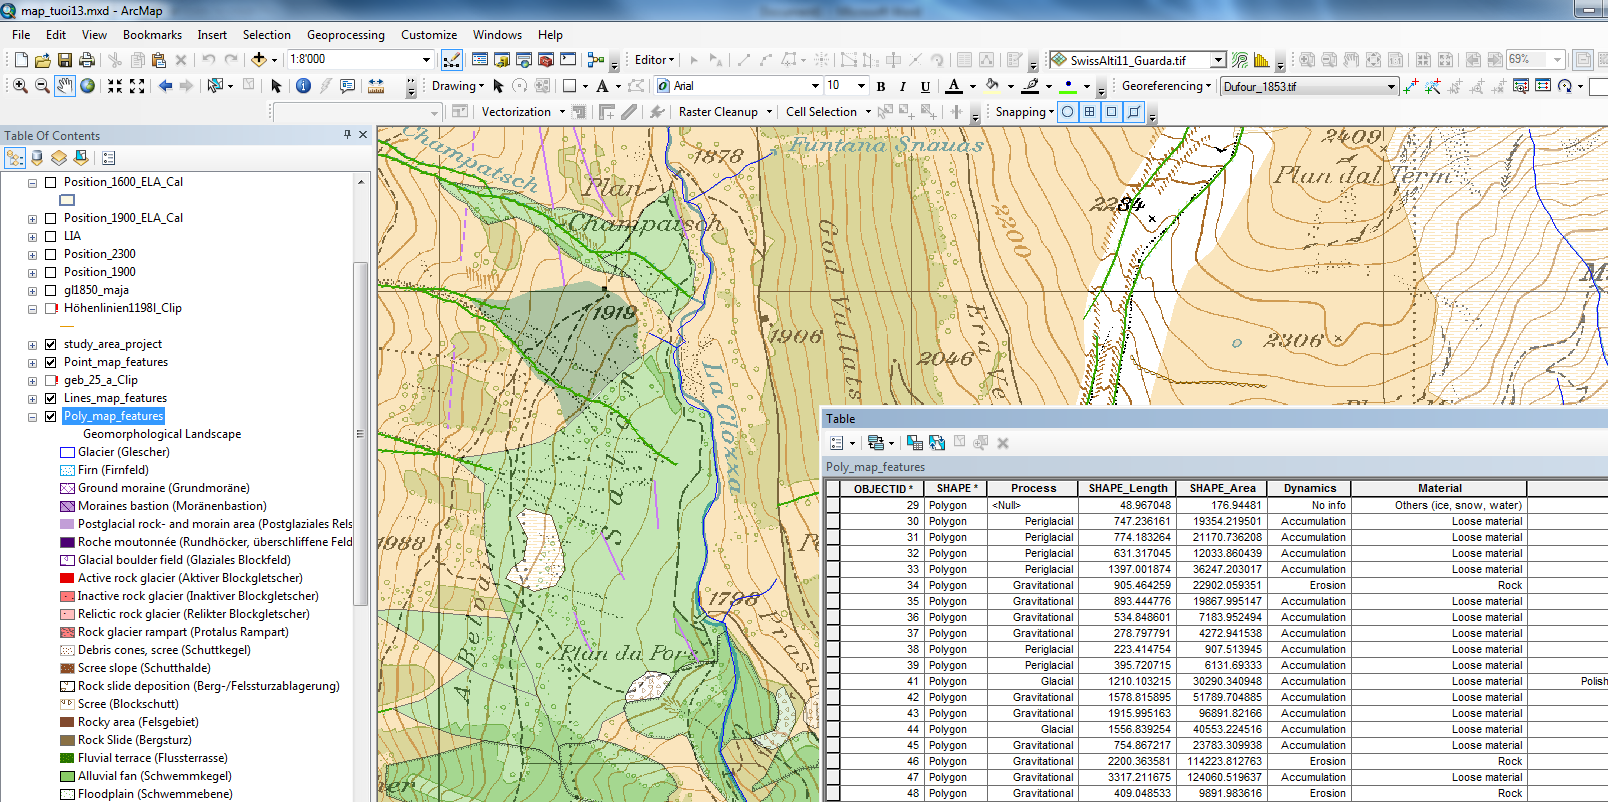 Enlarged view: Working with ArcGIS and Swisstopo Maps